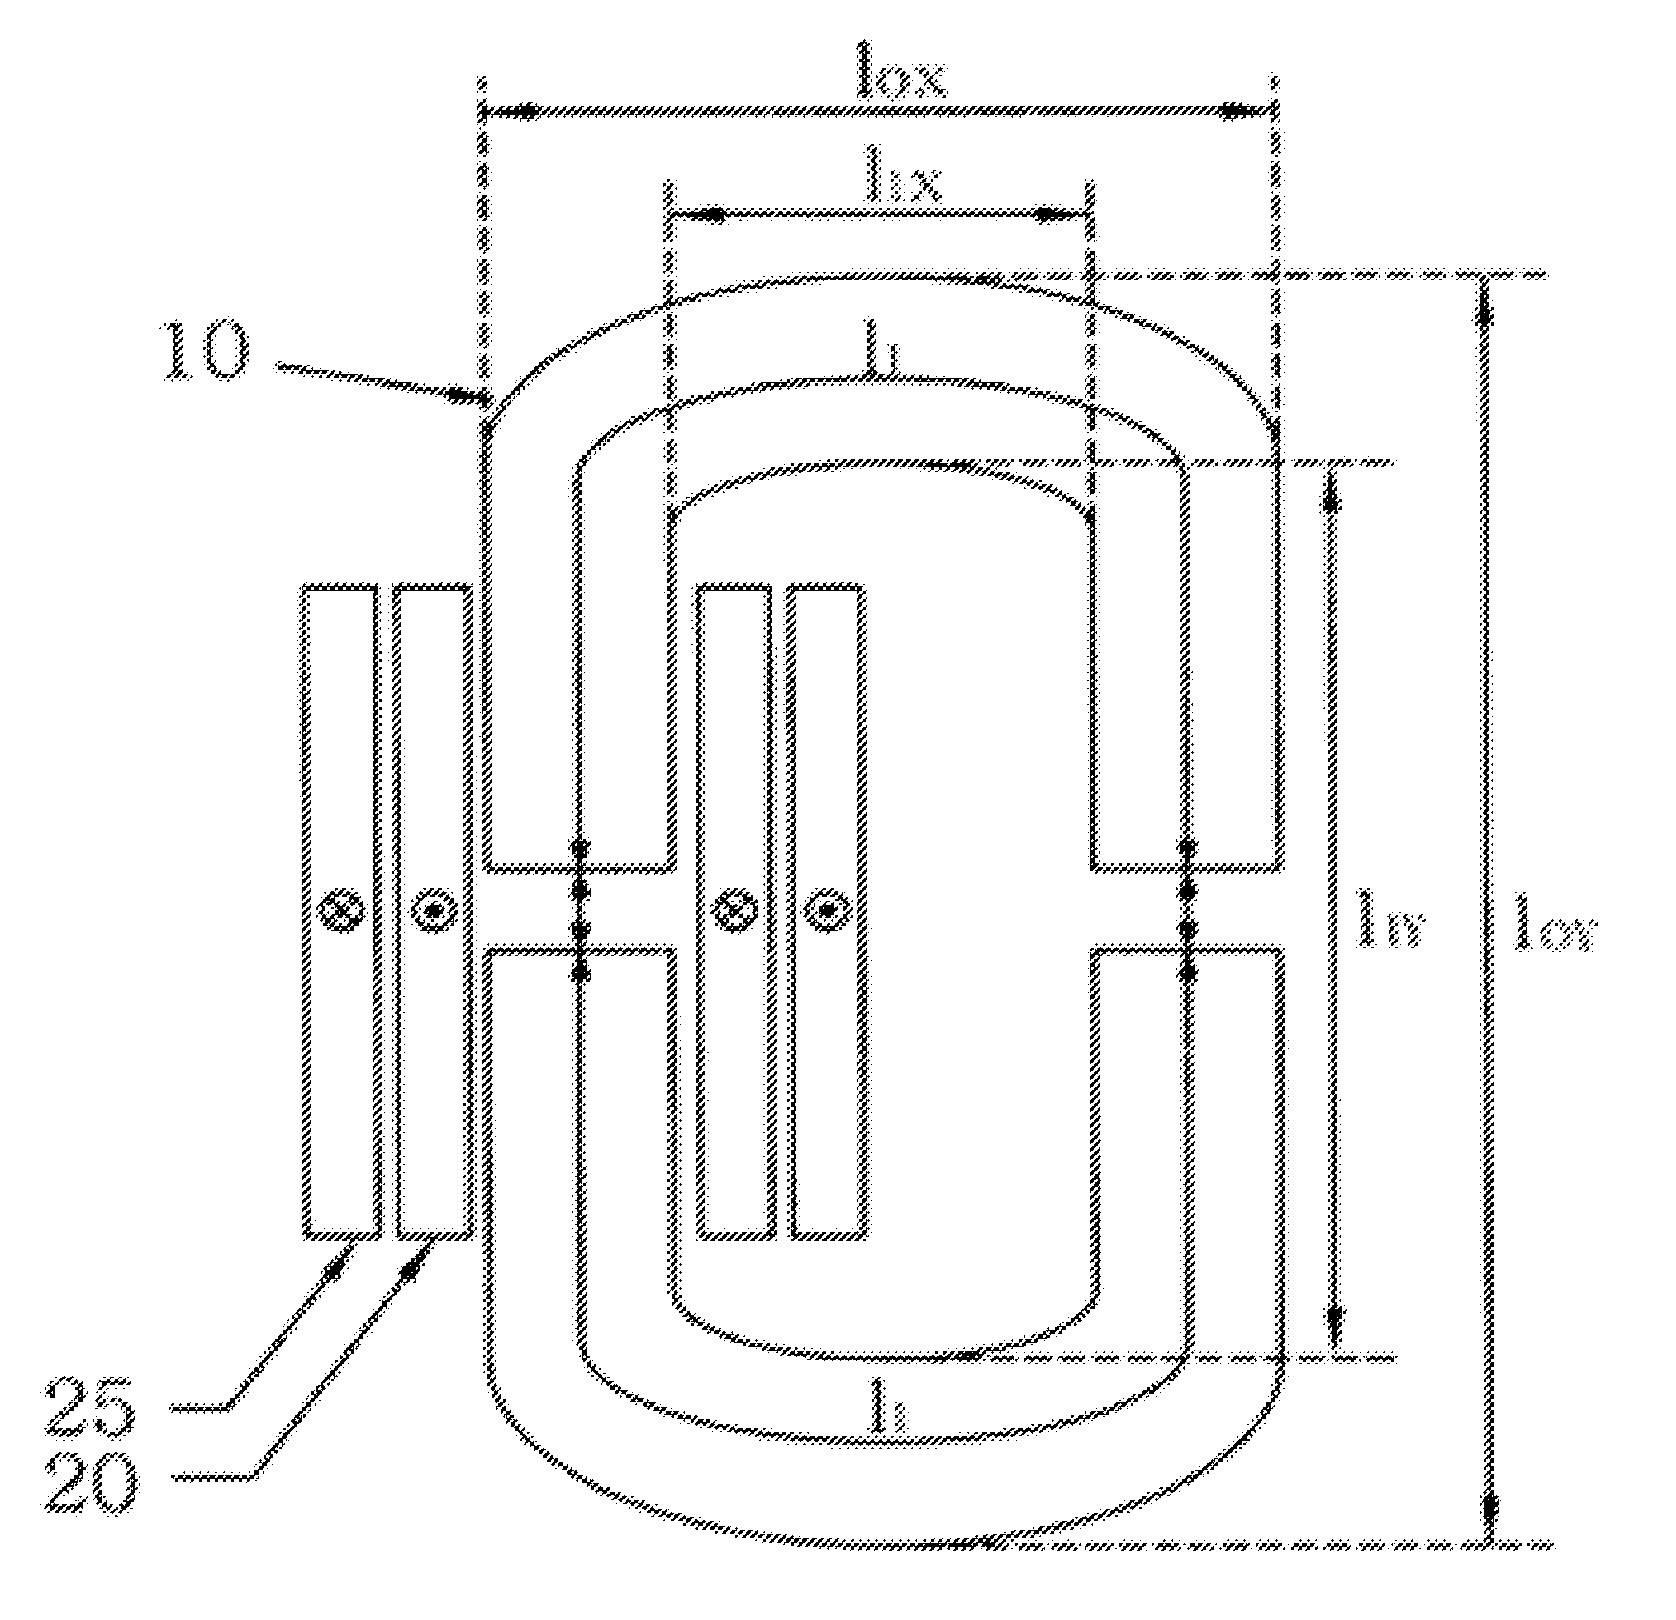 Magnetic flux-coupling type superconducting fault current limiter